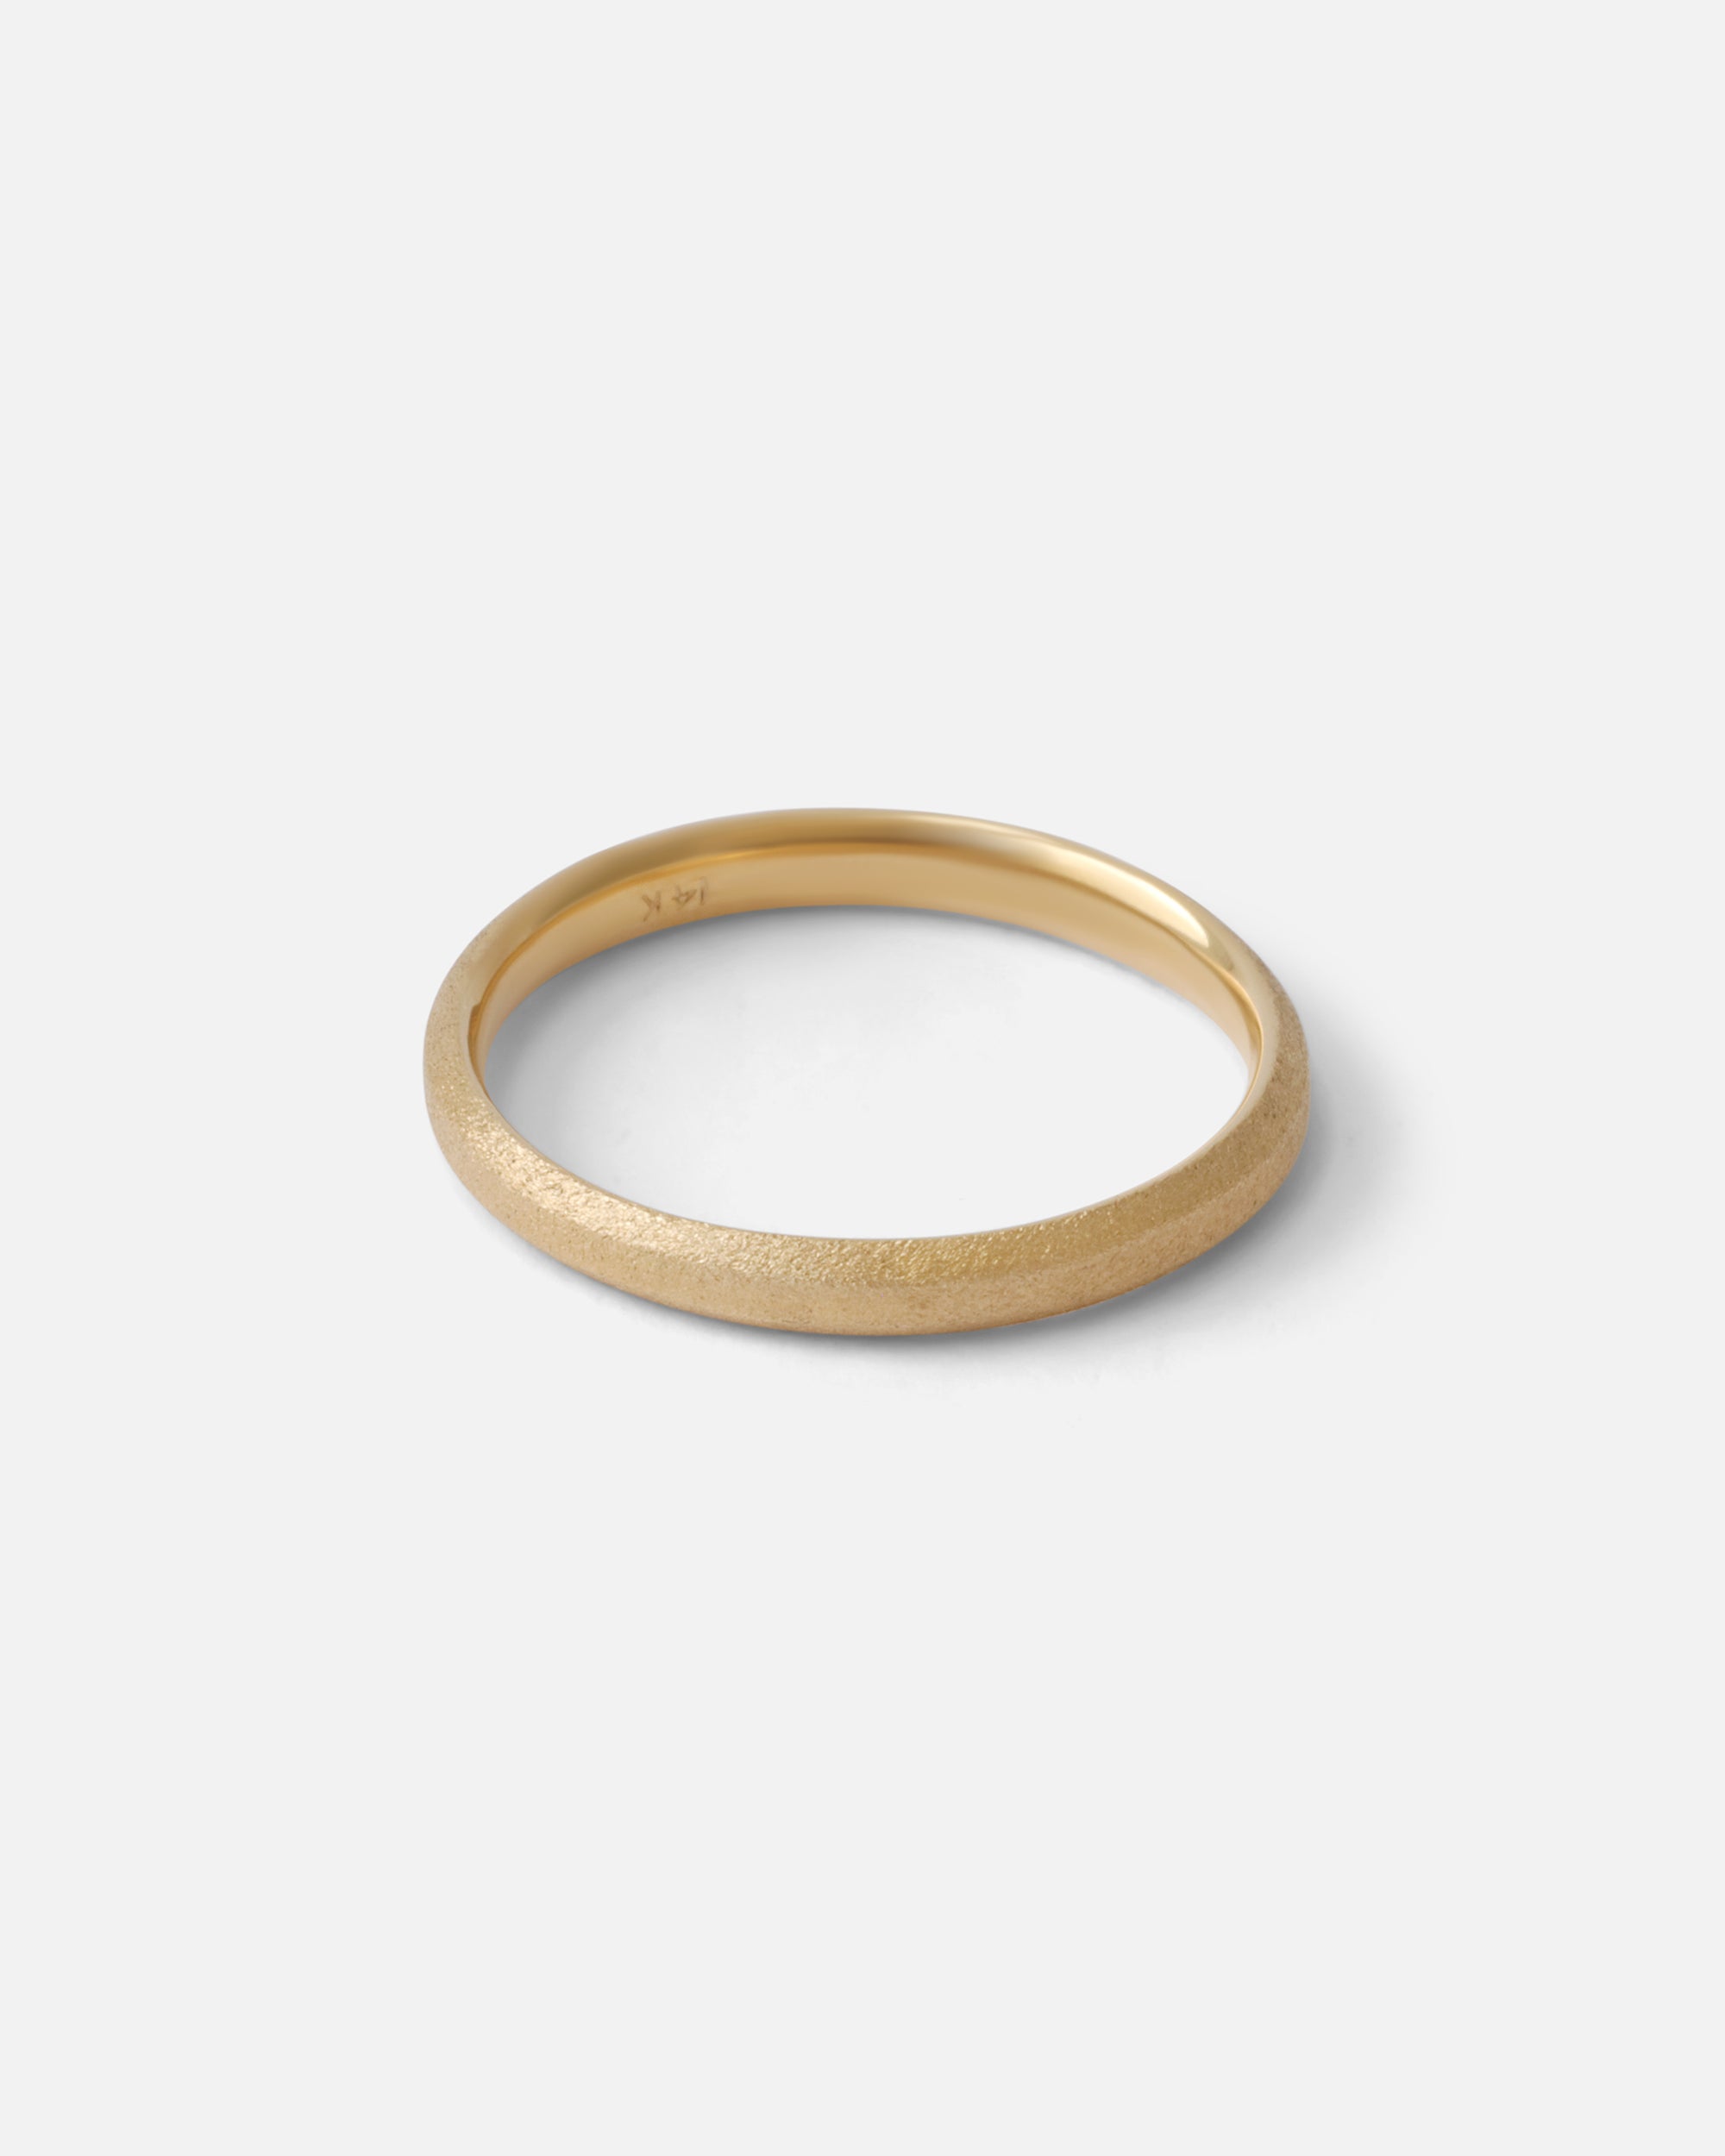 Hex Band / Matte By O Channell Designs